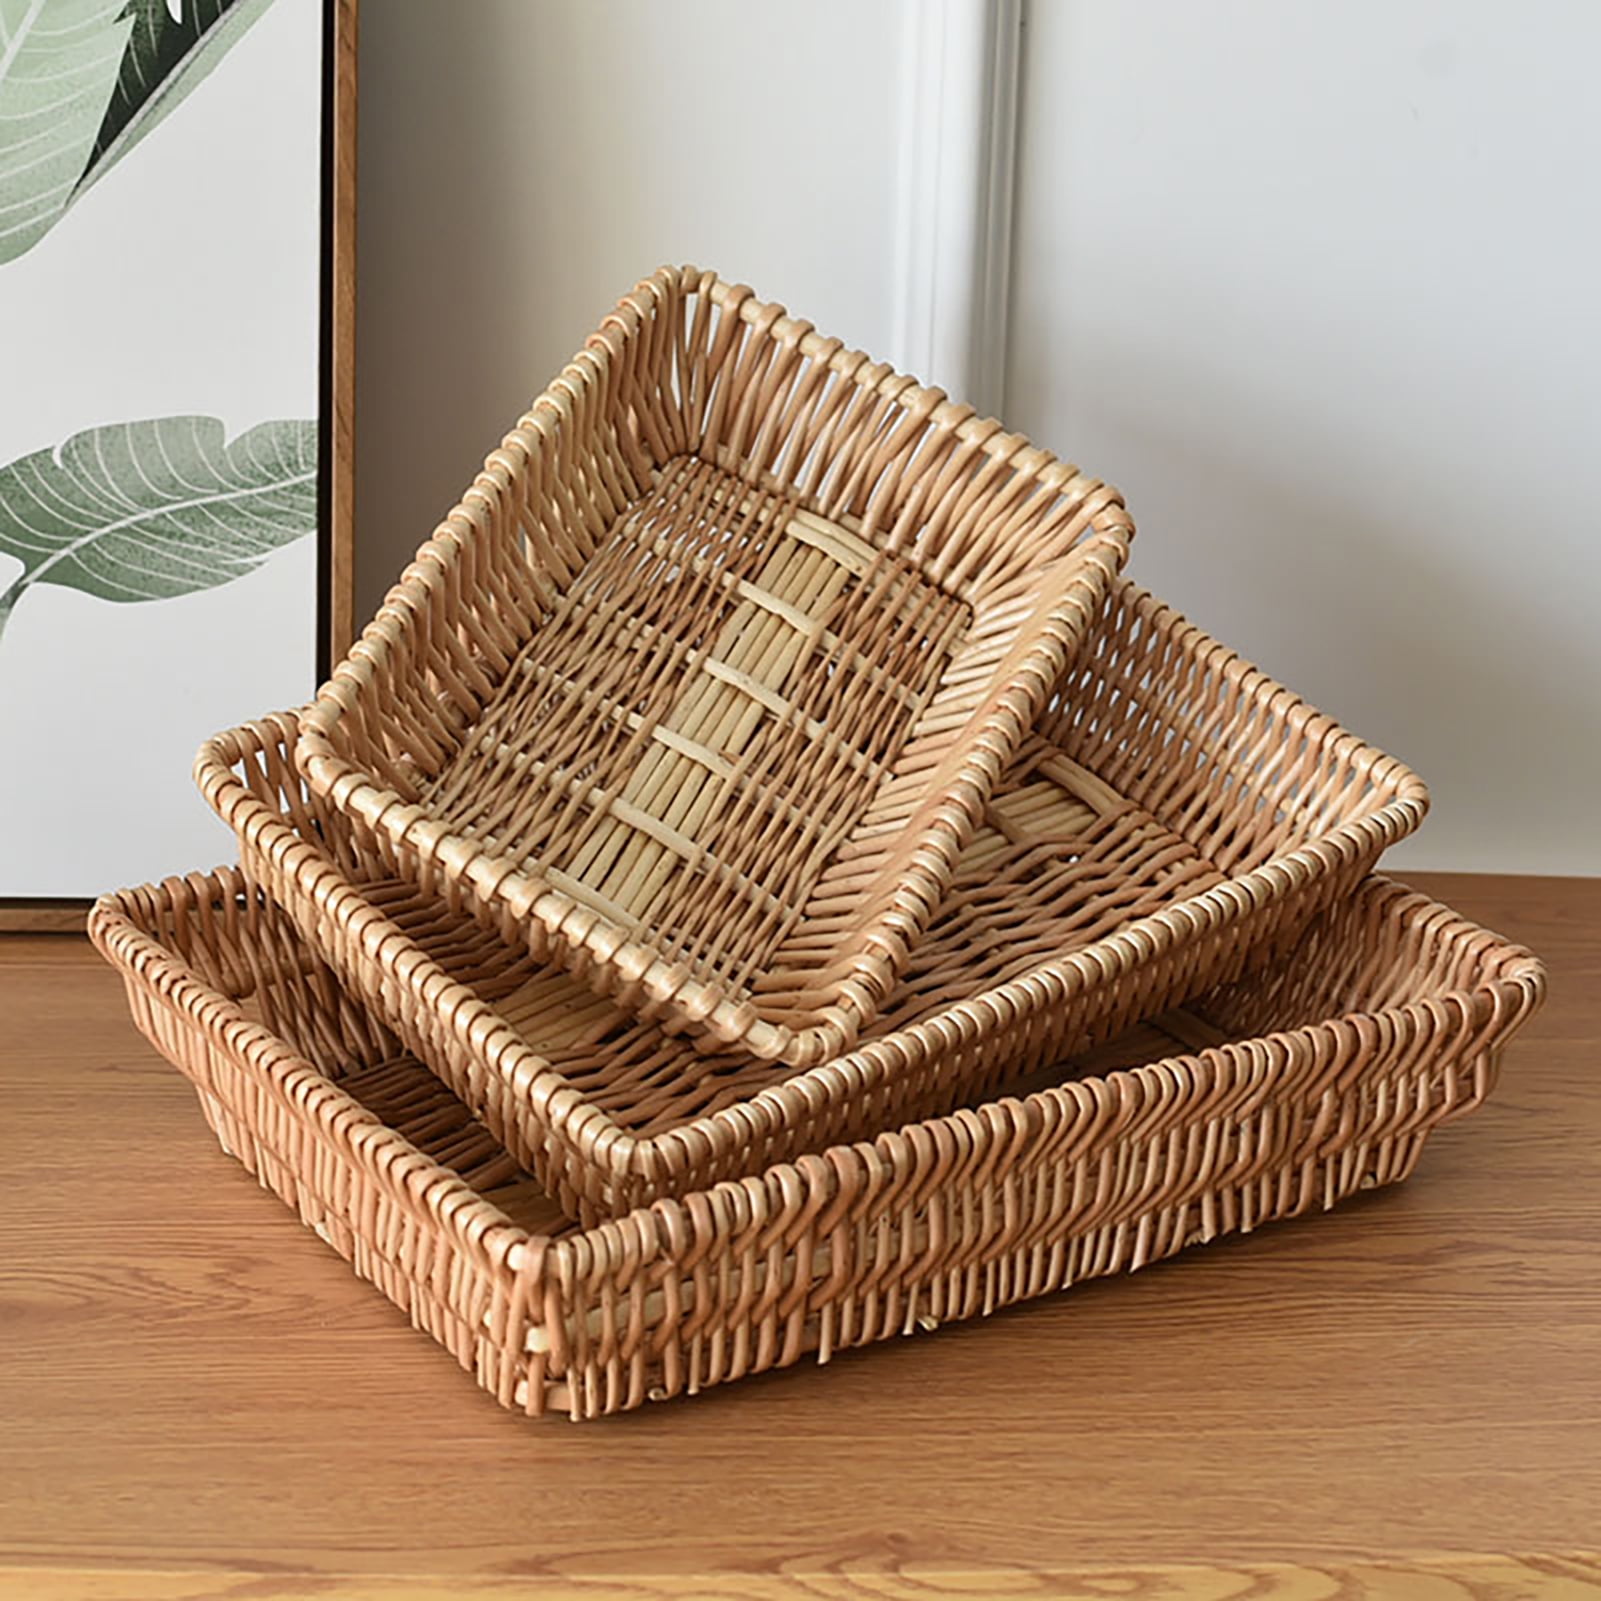 NEW FINCH WICKER NESTING BASKET SMALL LARGE AND JUMBO 